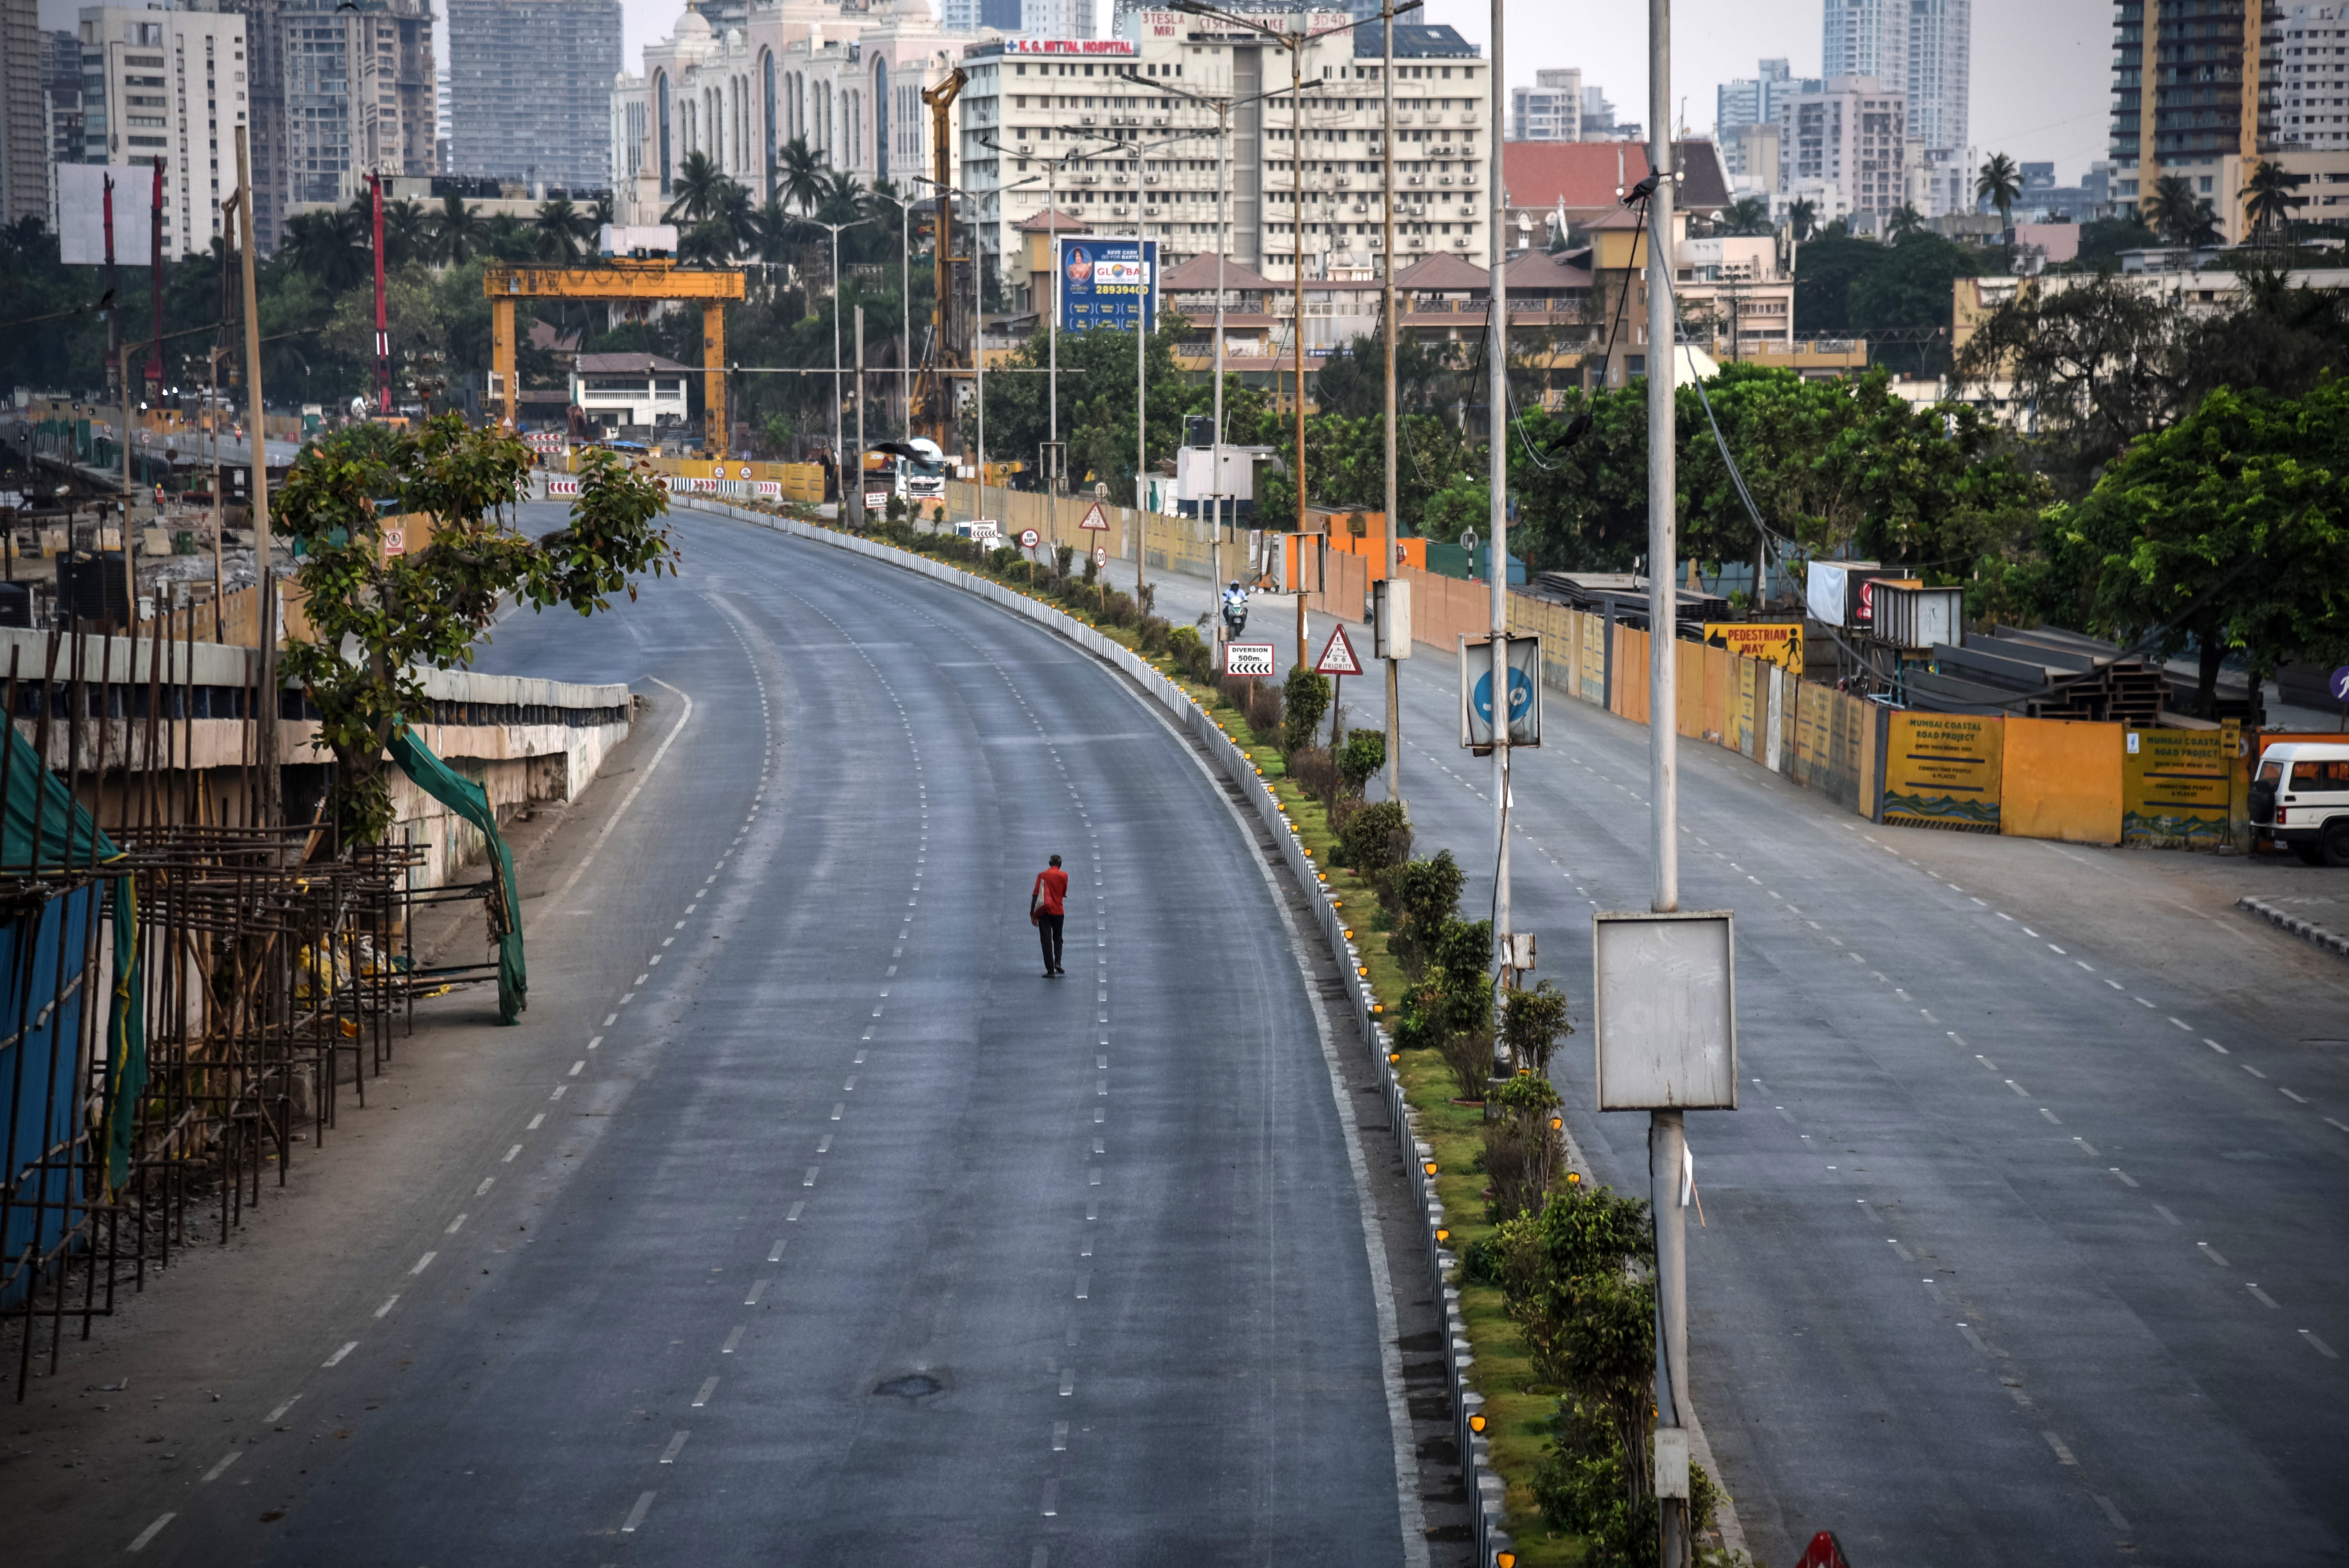 MUMBAI, INDIA - APRIL 29: A pedestrian walks along a near-deserted street during a lockdown imposed to try and contain the spread of Covid-19 on April 29, 2021 in Mumbai, India. With recorded cases crossing 380,000 a day and 3000 deaths in the last 24 hou (Foto: Getty Images)